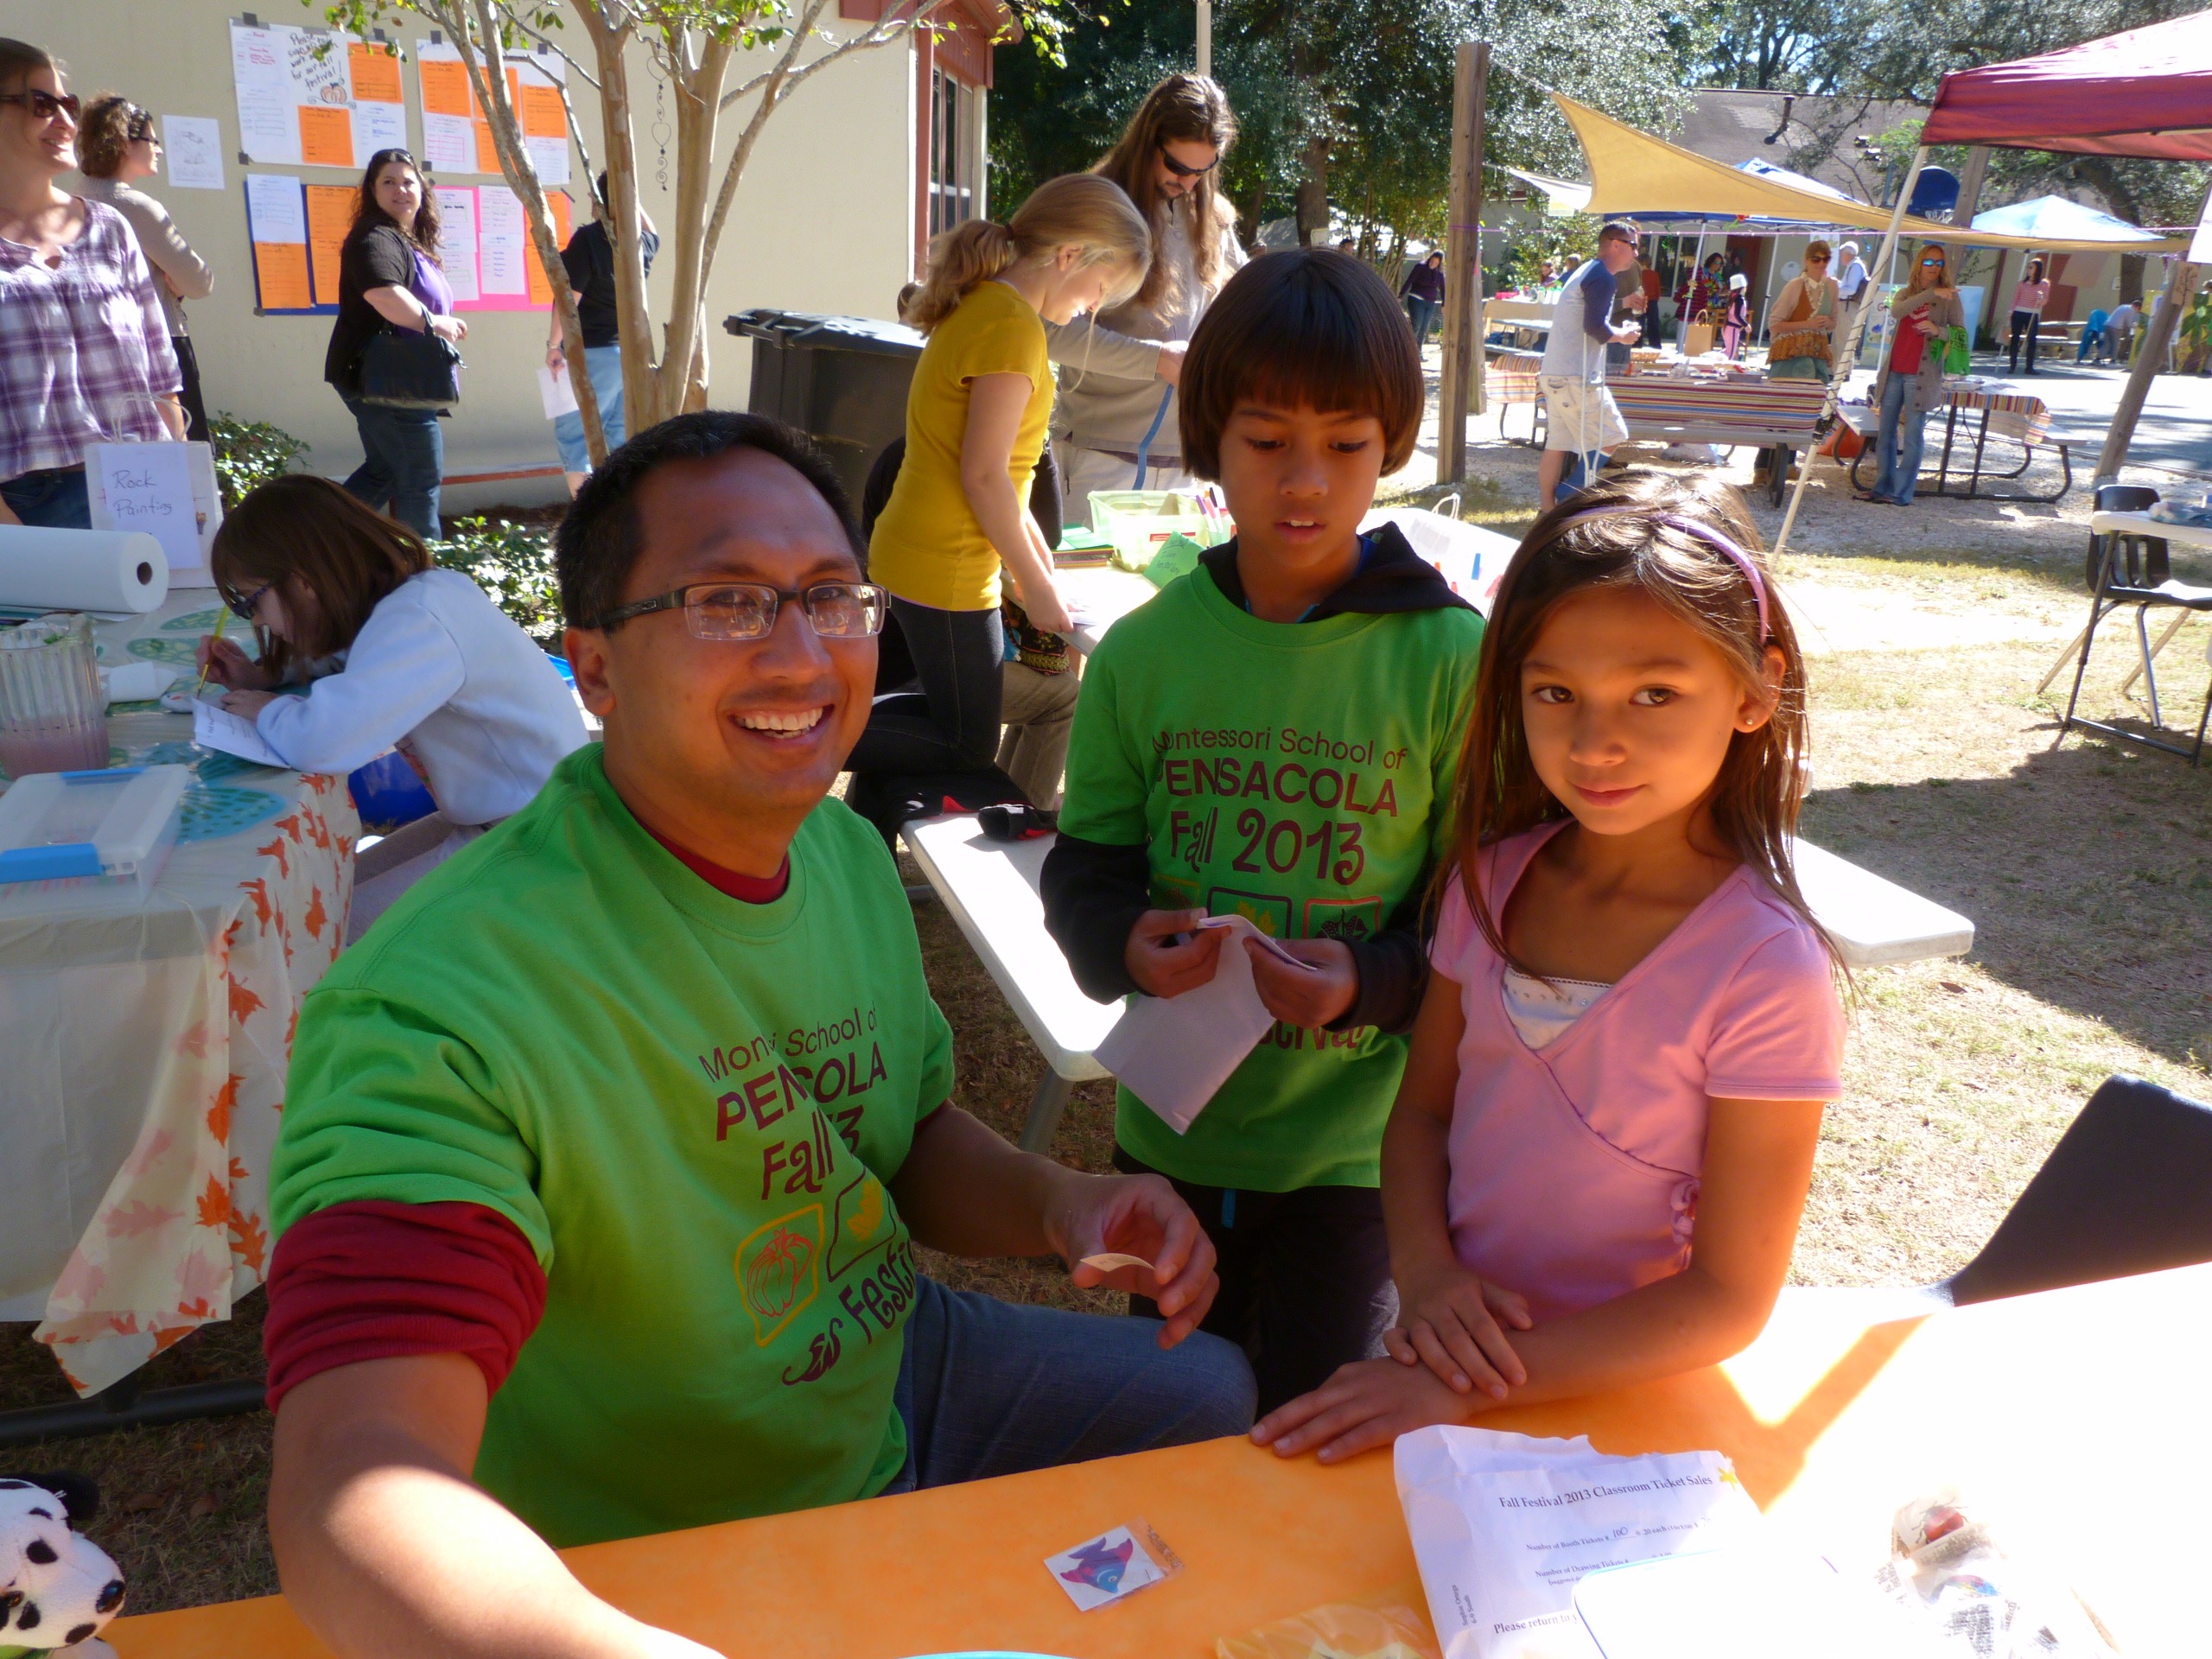 Father and children enjoying the 2013 MSP Fall Festival